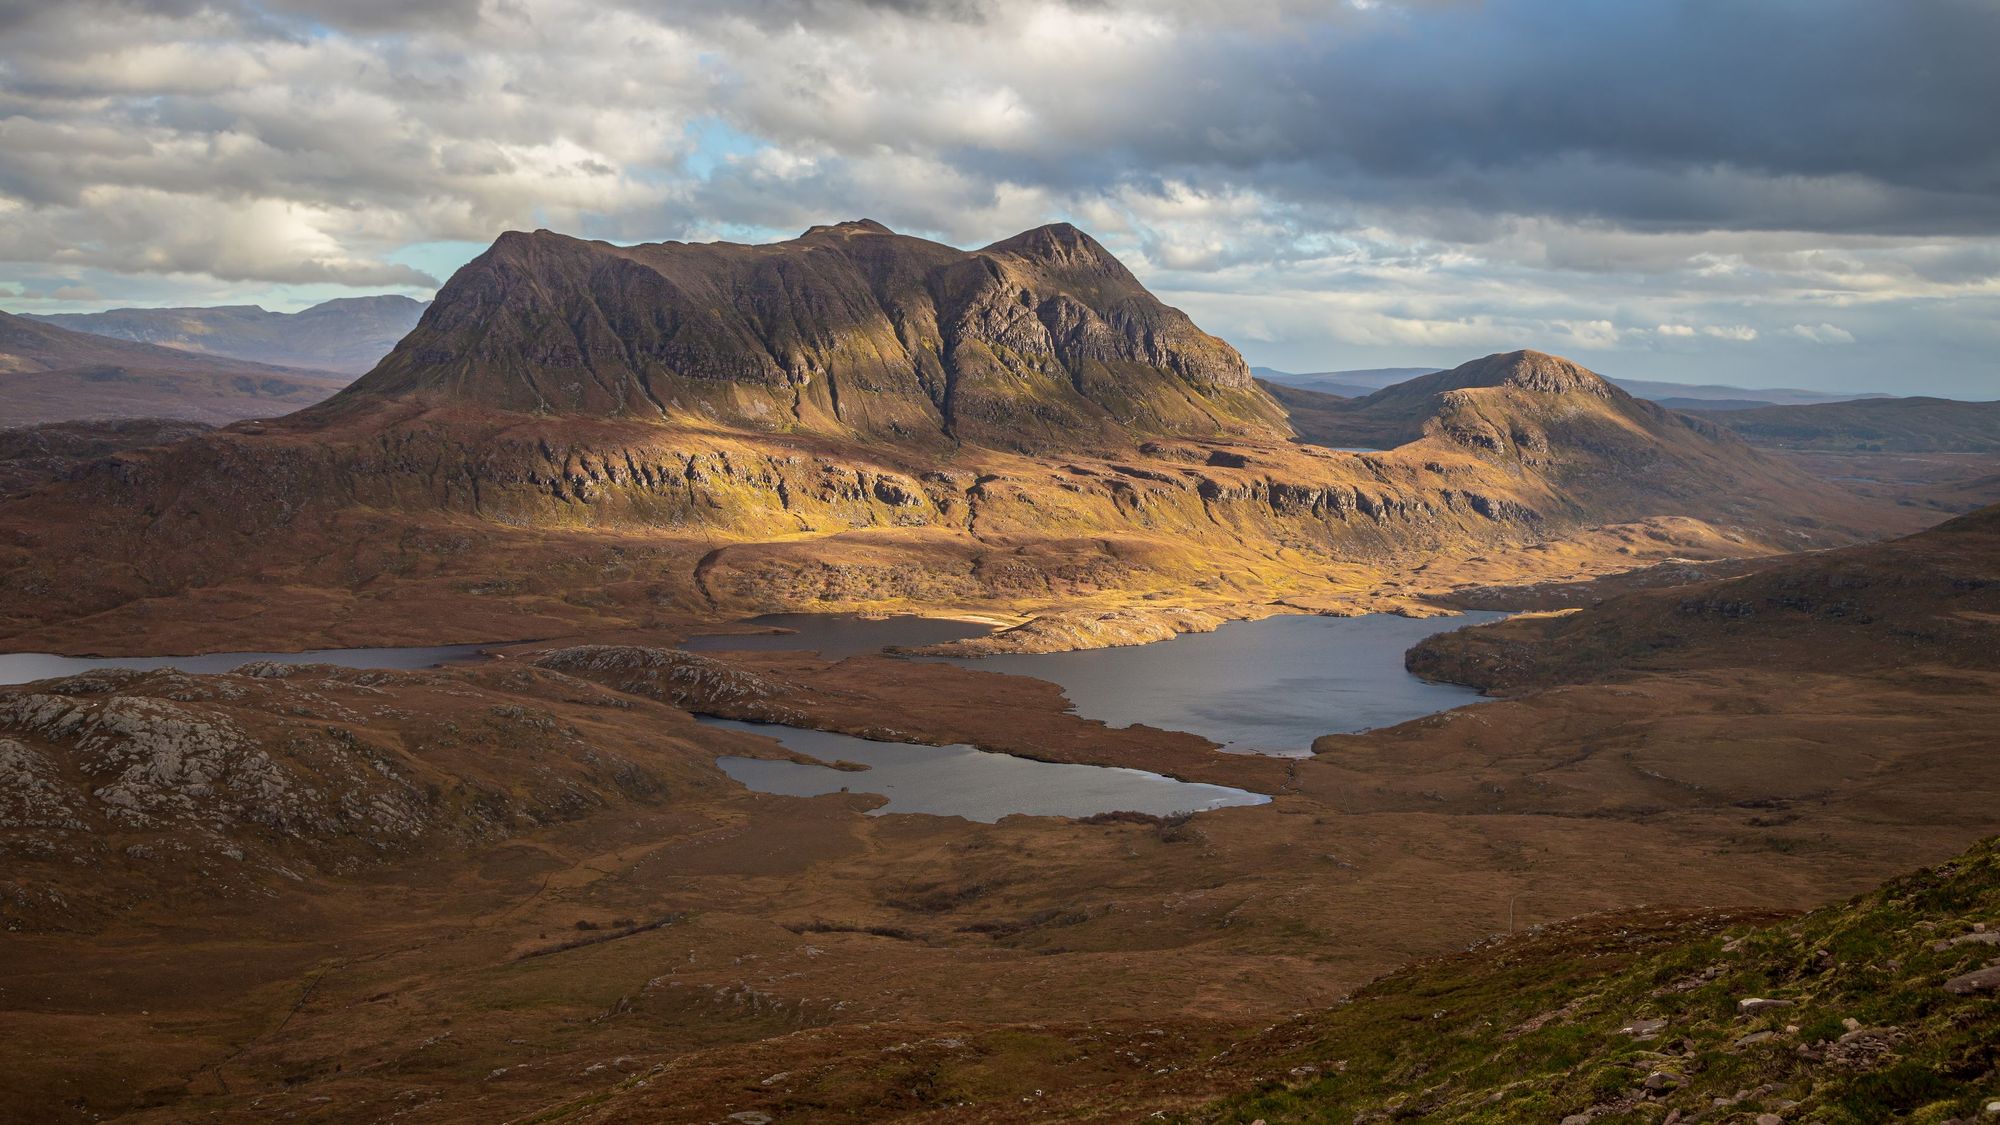 The view of Suilven and Assynt from the summit of Stac Pollaidh. Photo: Getty